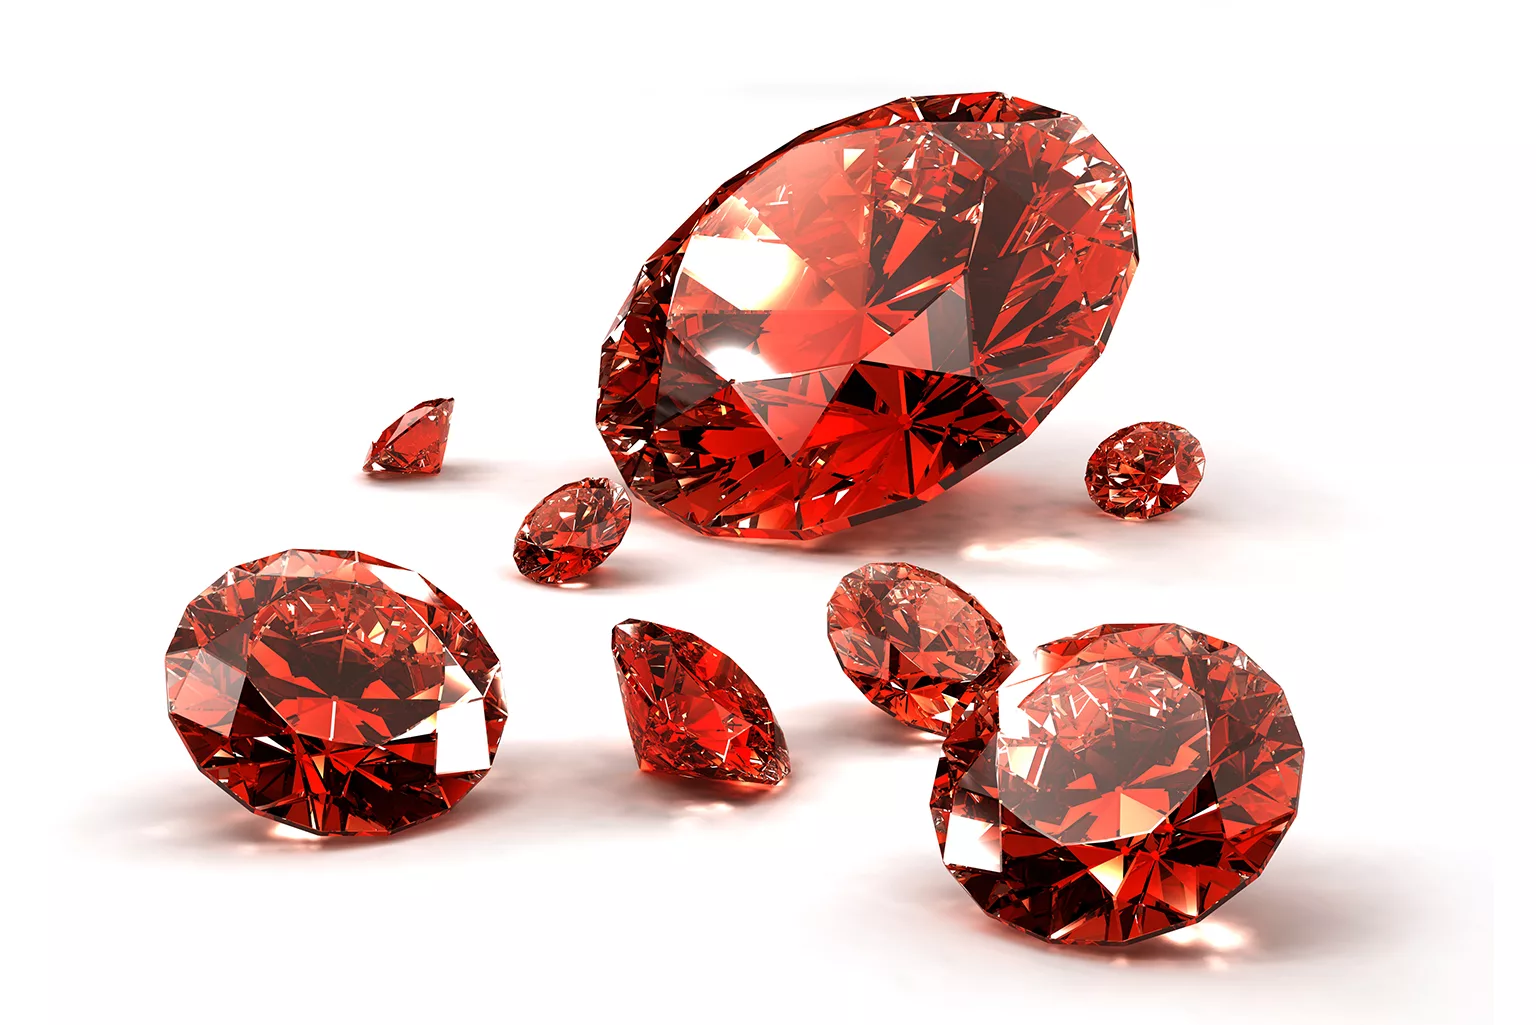 Rubies : Digging into Ruby